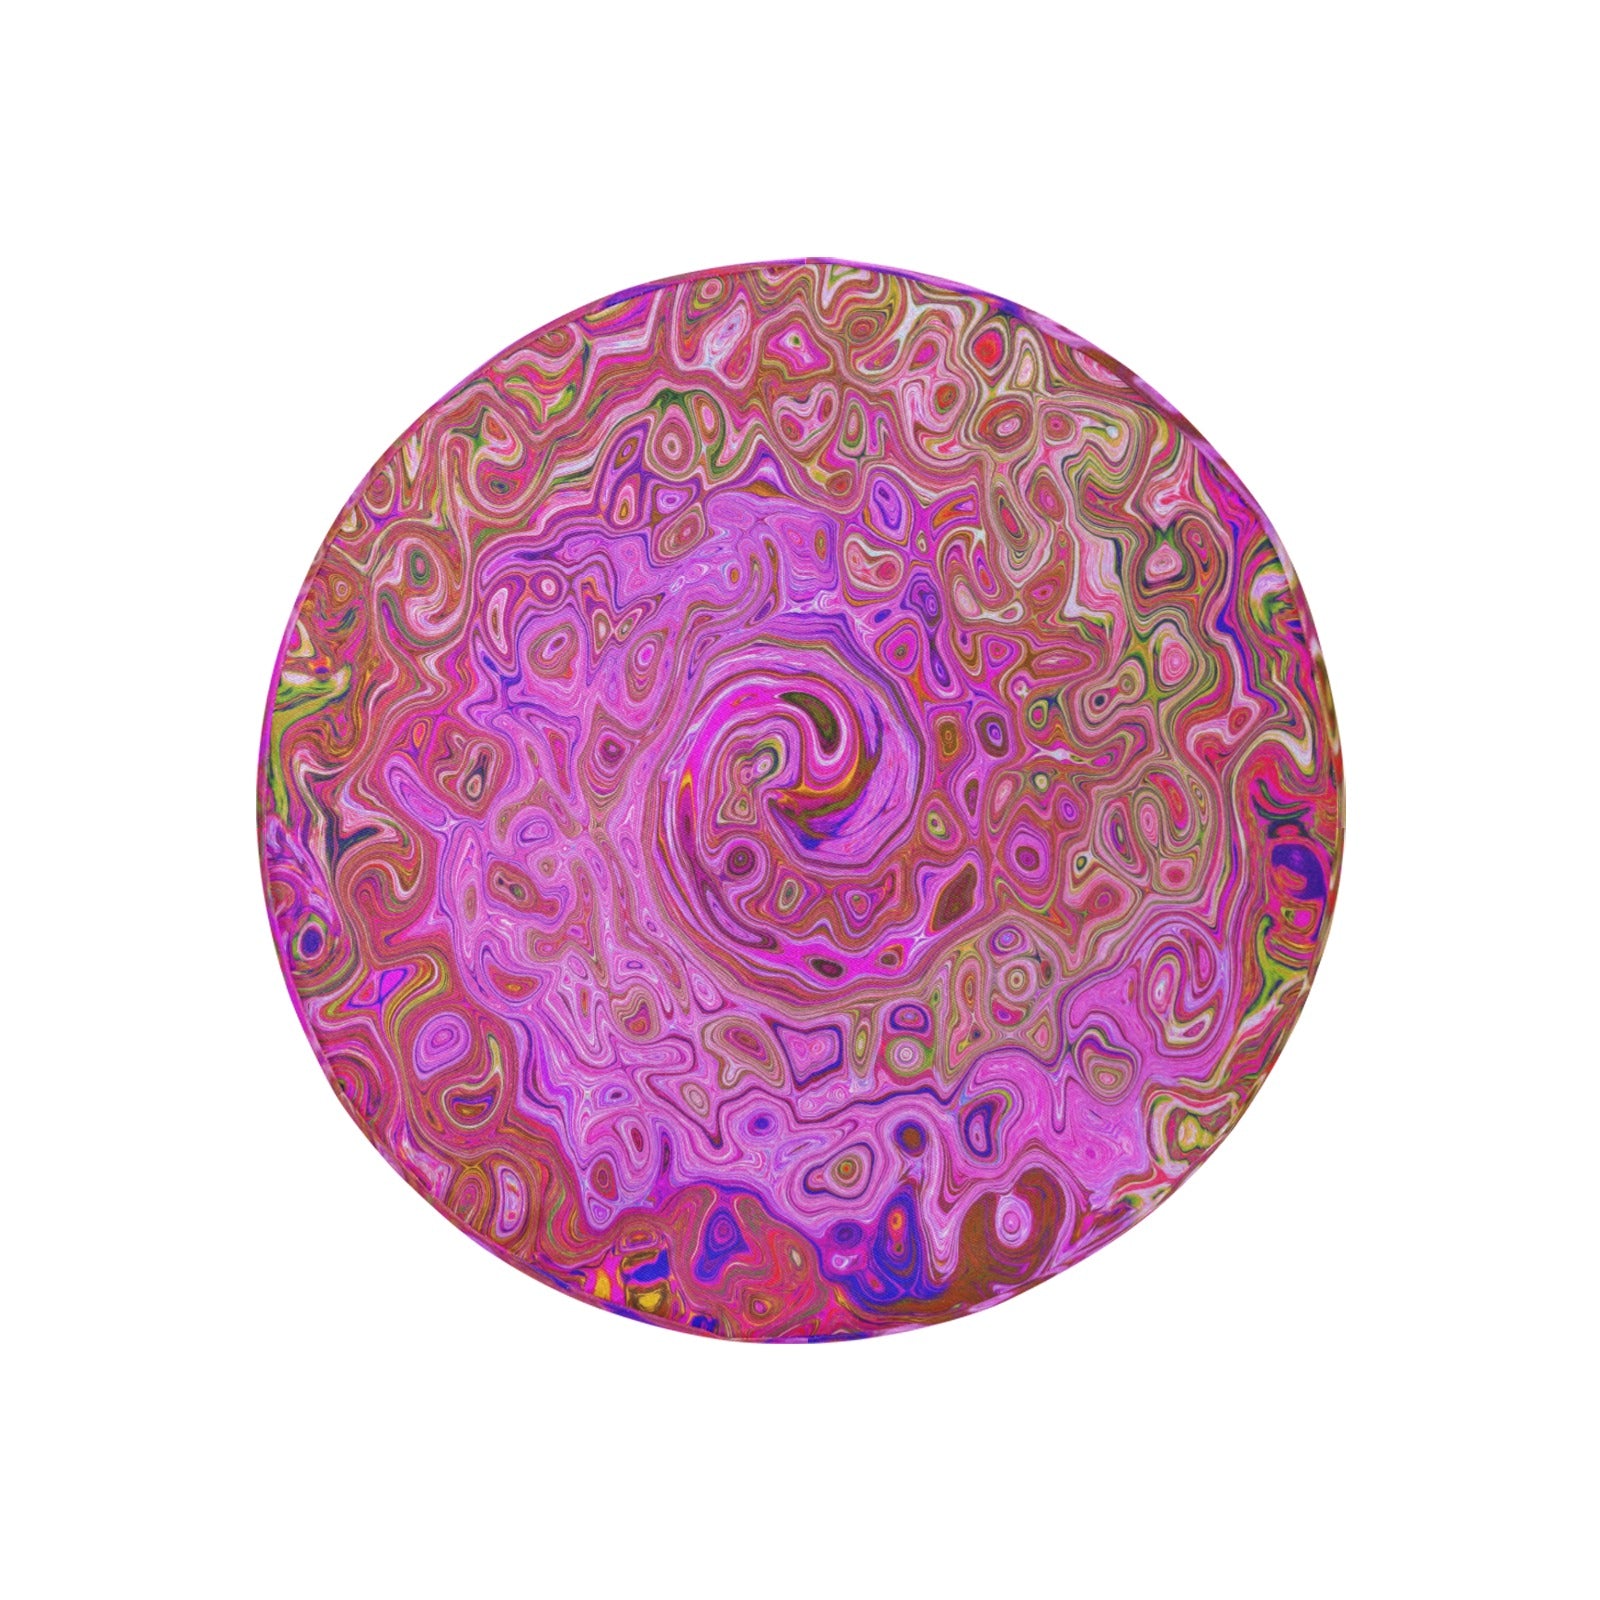 Spare Tire Covers, Hot Pink Marbled Colors Abstract Retro Swirl - Small